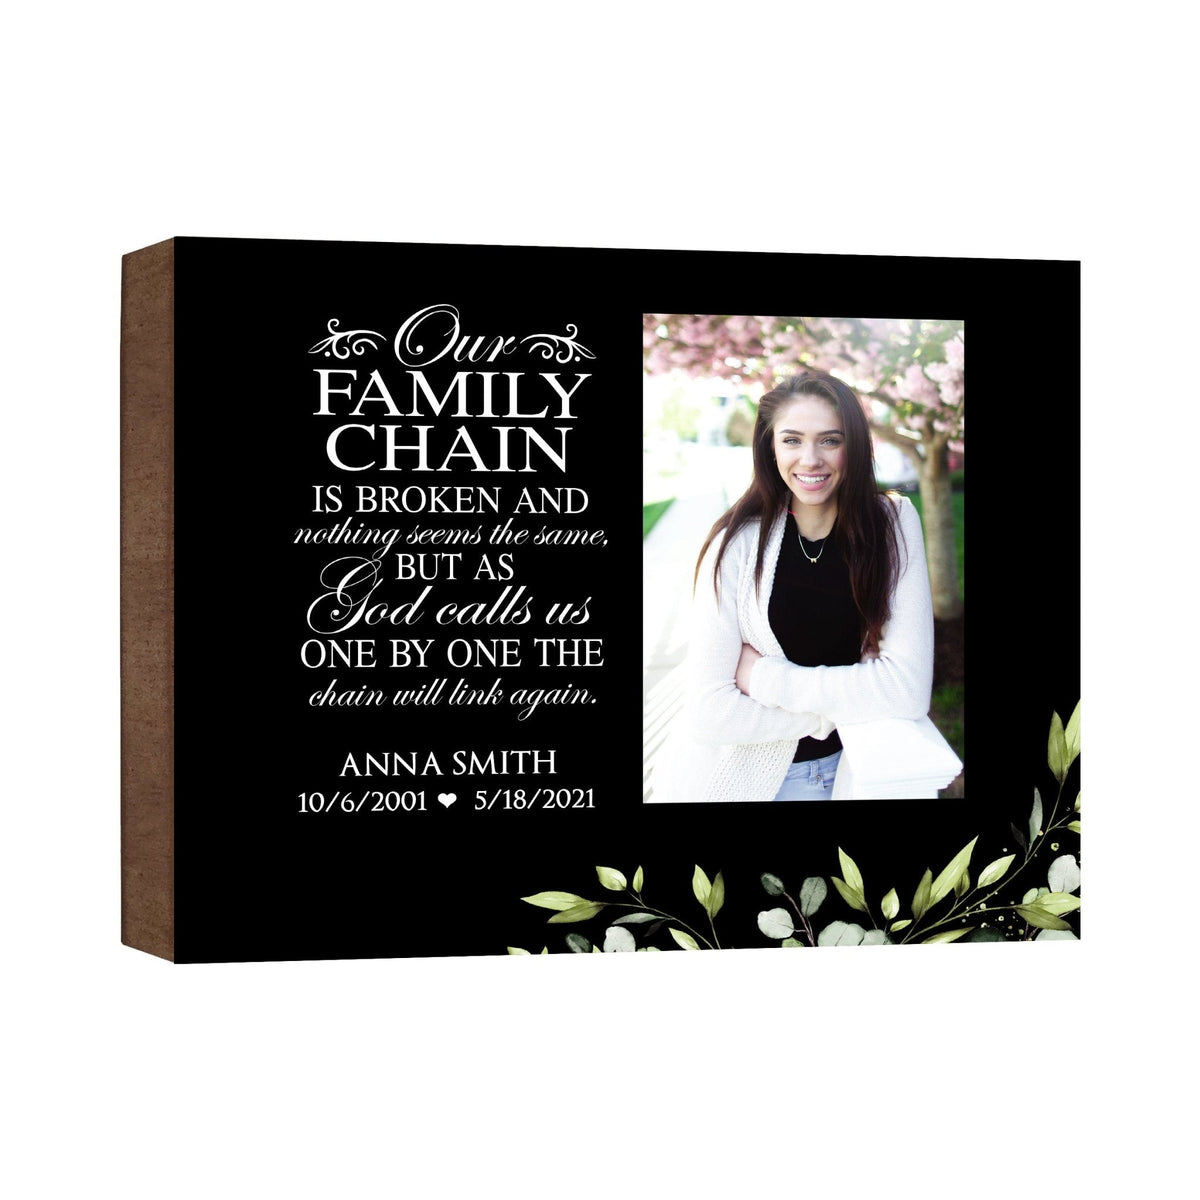 Personalized Human Memorial Black Photo &amp; Inspirational Verse Bereavement Wall Décor &amp; Sympathy Gift Ideas - Our Family Chain - LifeSong Milestones